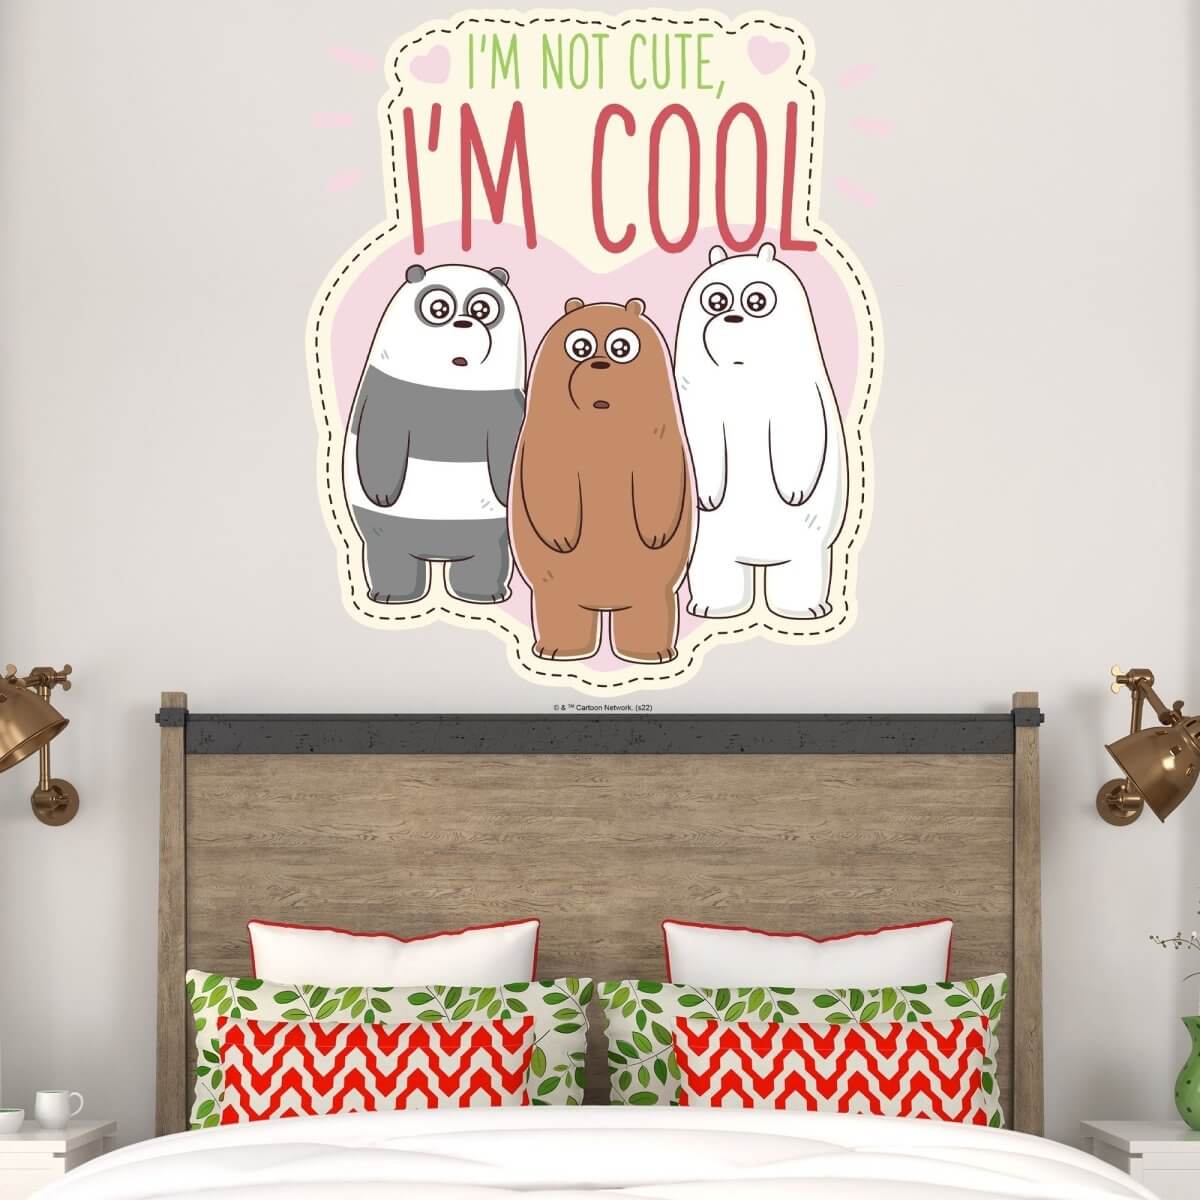 Kismet Decals Home & Room Decor We Bare Bears Cool Bears Wall decal sticker - officially licensed - latex printed with no solvent odor - Kismet Decals